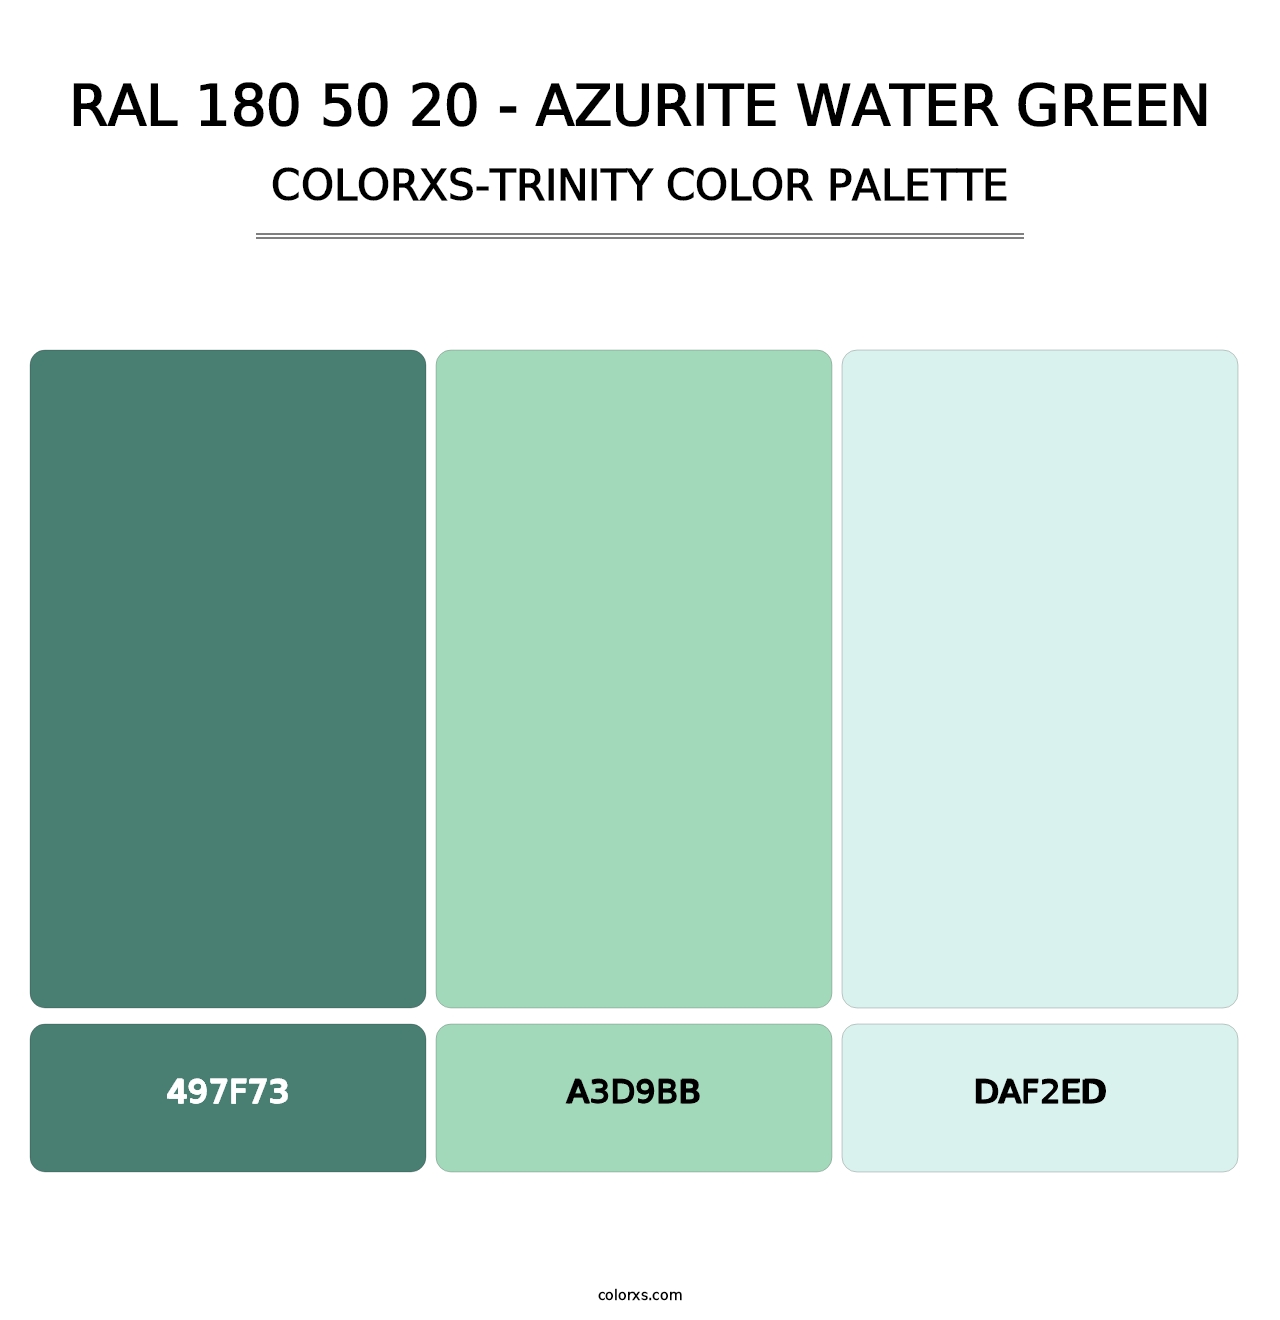 RAL 180 50 20 - Azurite Water Green - Colorxs Trinity Palette